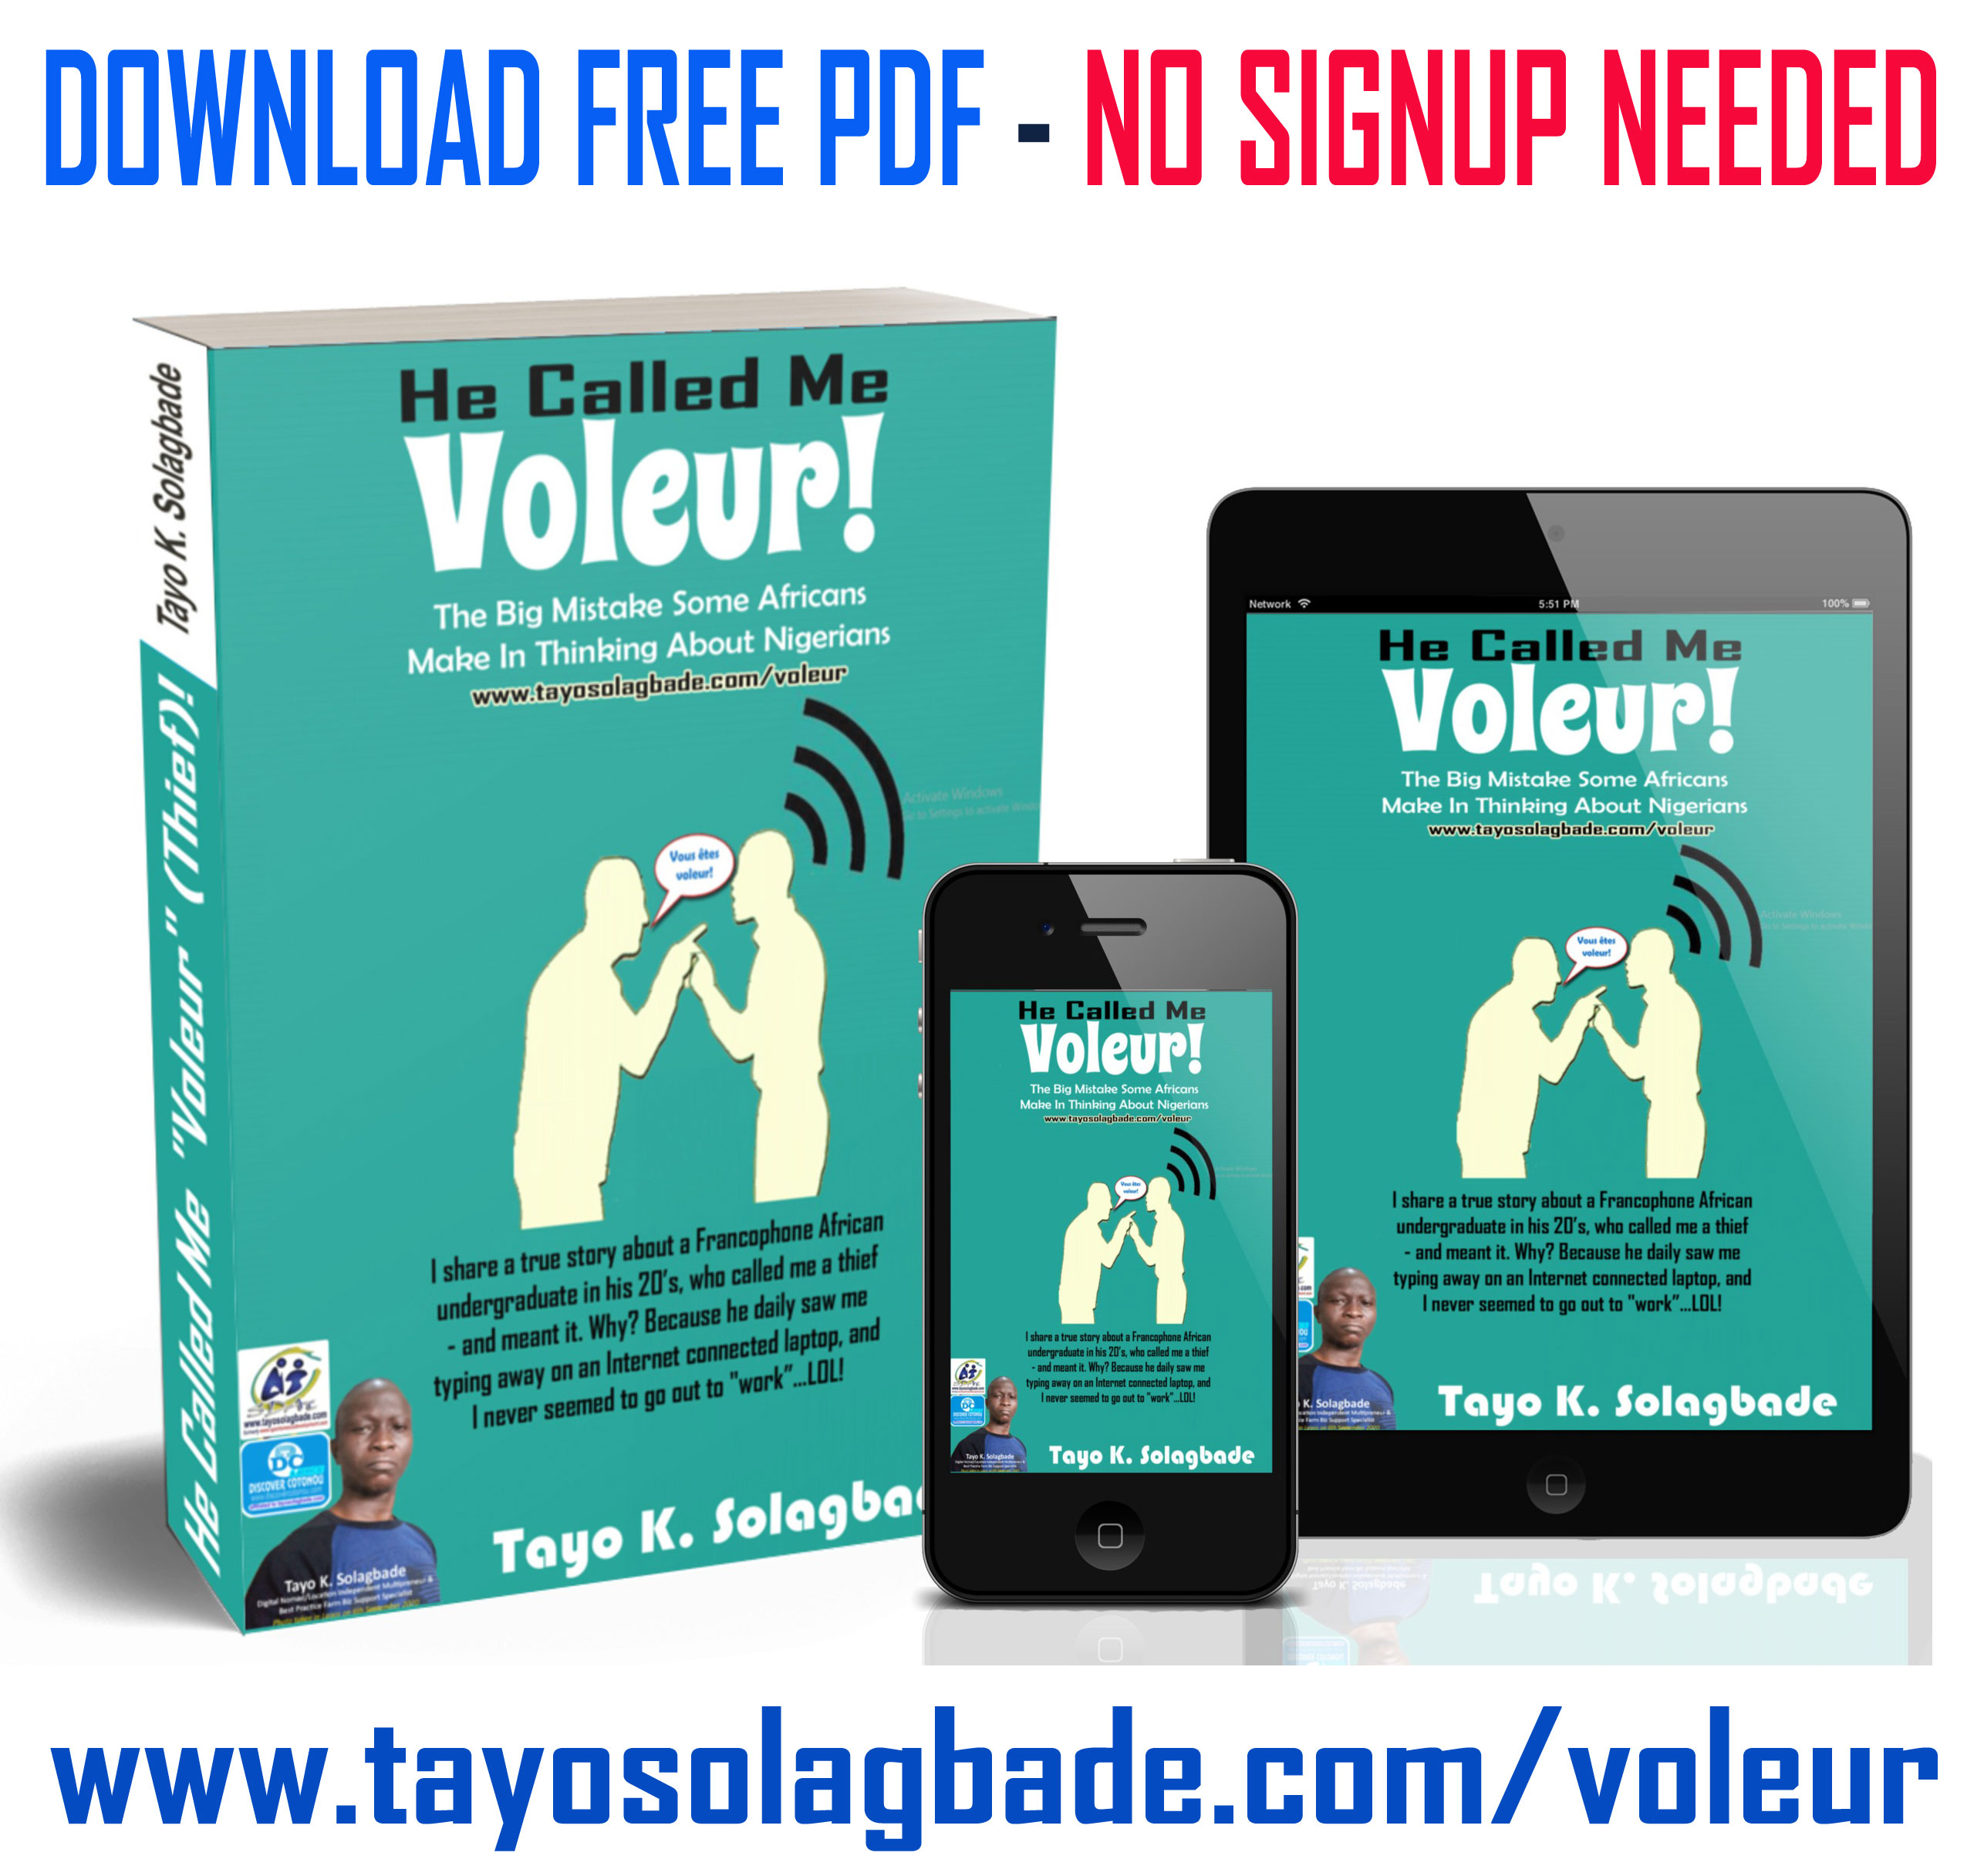 [PDF] He Called Me Voleur! - Click to download PDF version of this article and read offline